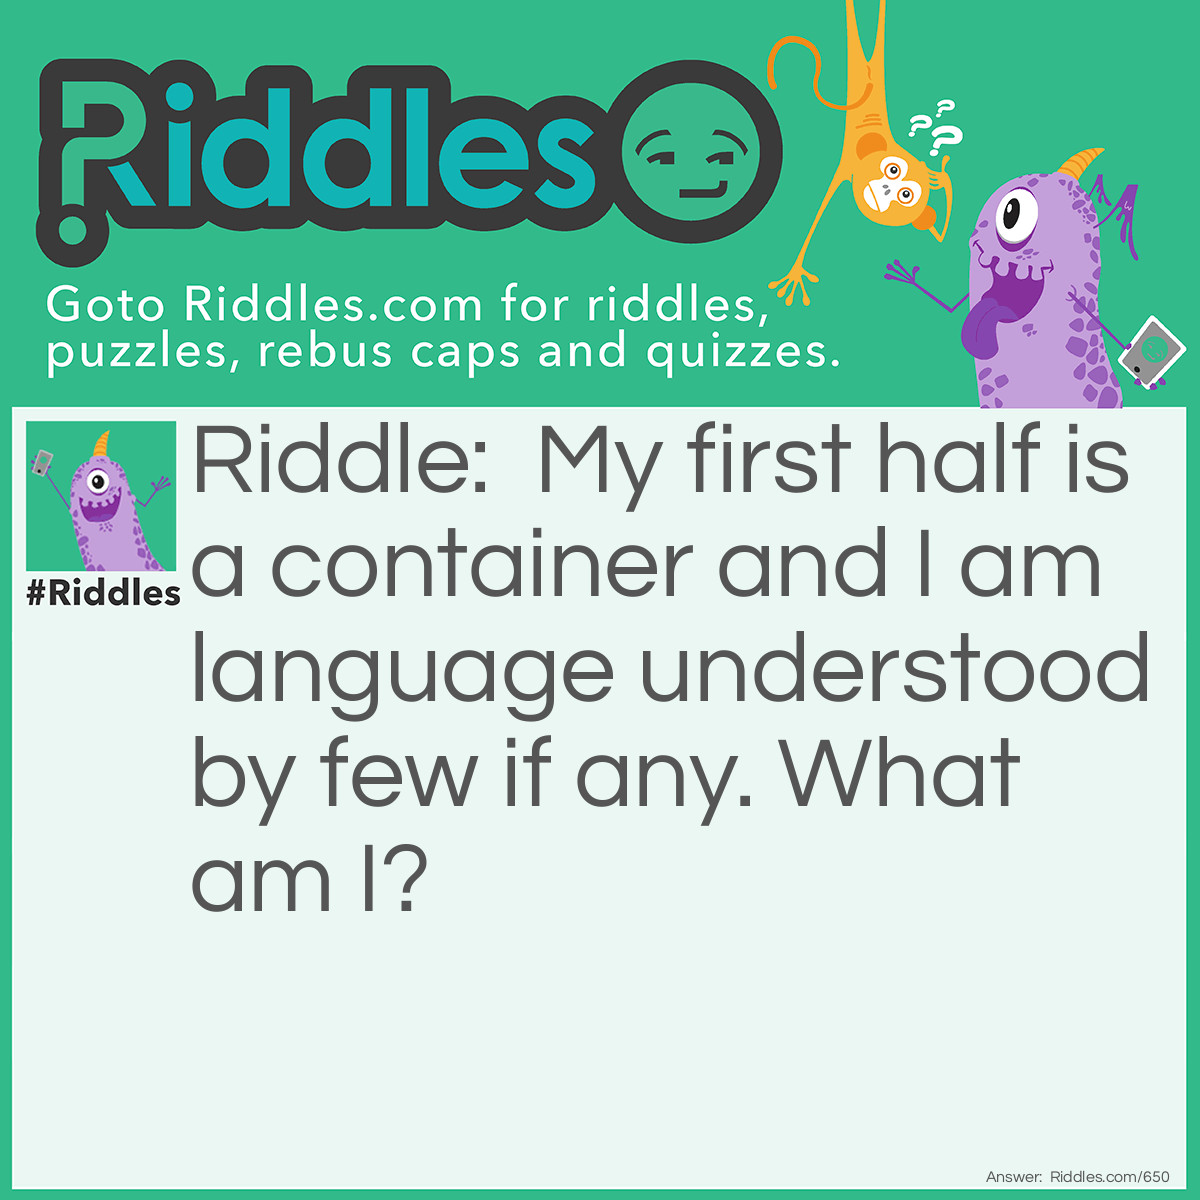 Riddle: My first half is a container and I am language understood by few if any. What am I? Answer: Jargon.